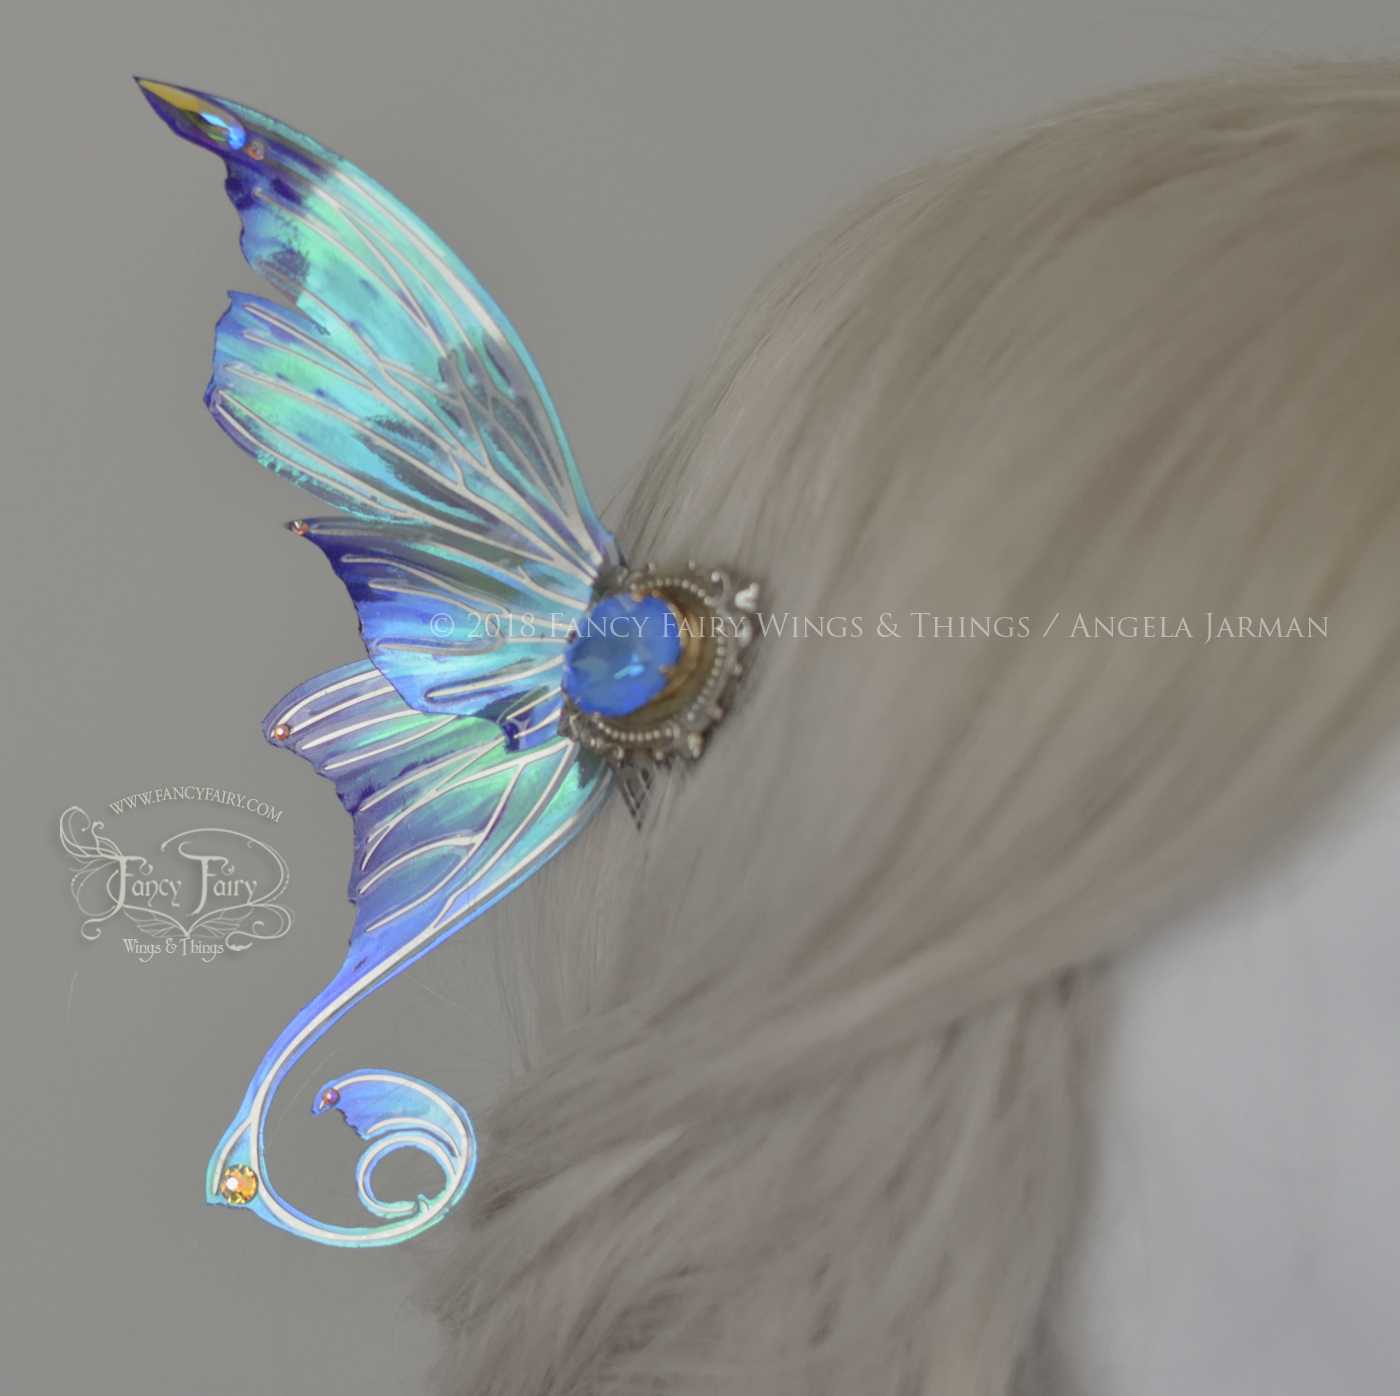 Aphrodite 3 and 1/2 inch Oceanic Fairy Wing Hair Combs with Silver Veins